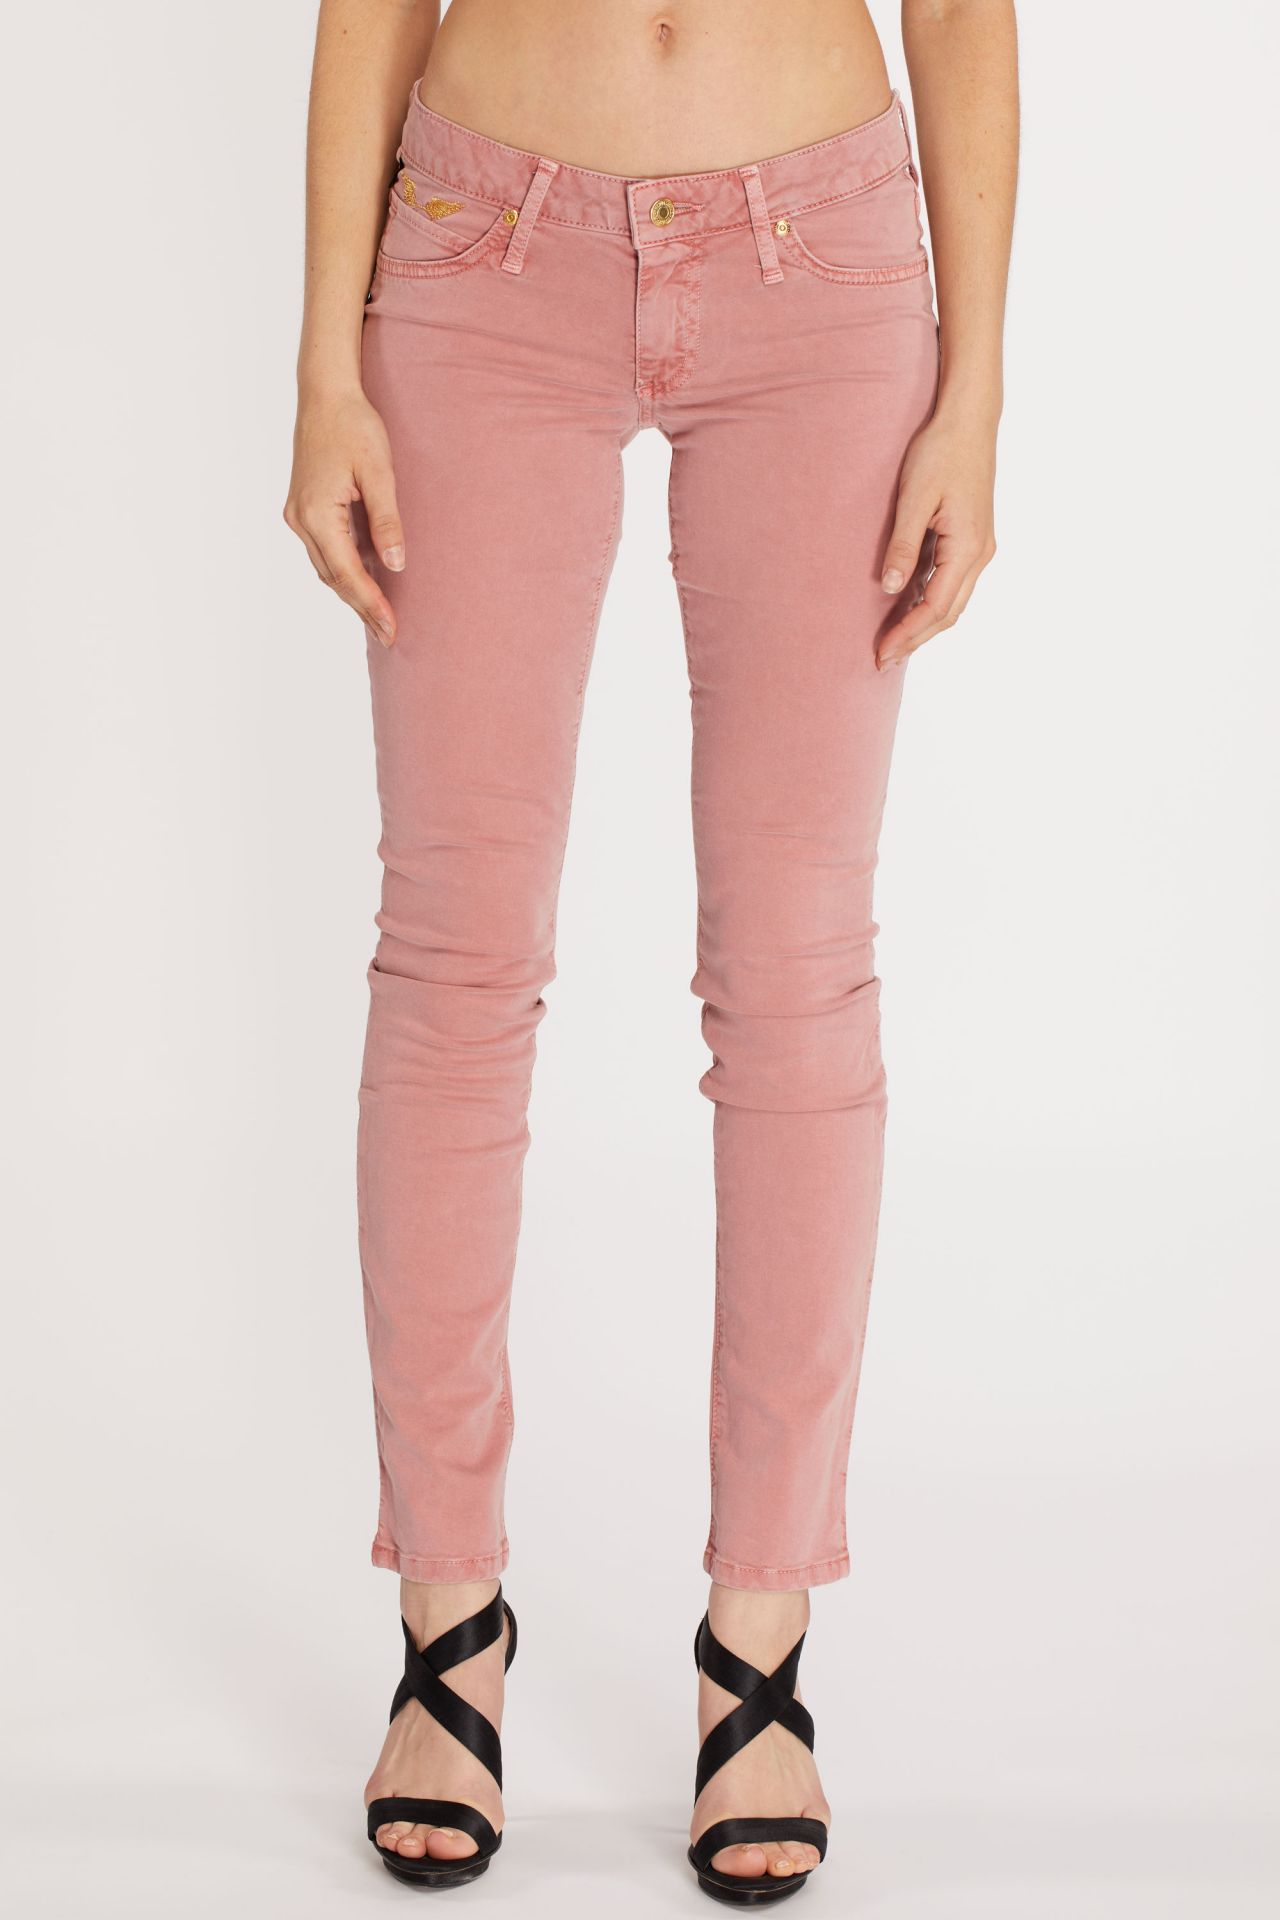 Tiffosi Tiffosi One Size Double Comfort Skinny Jeans in Dusty Pink |  iCLOTHING - iCLOTHING